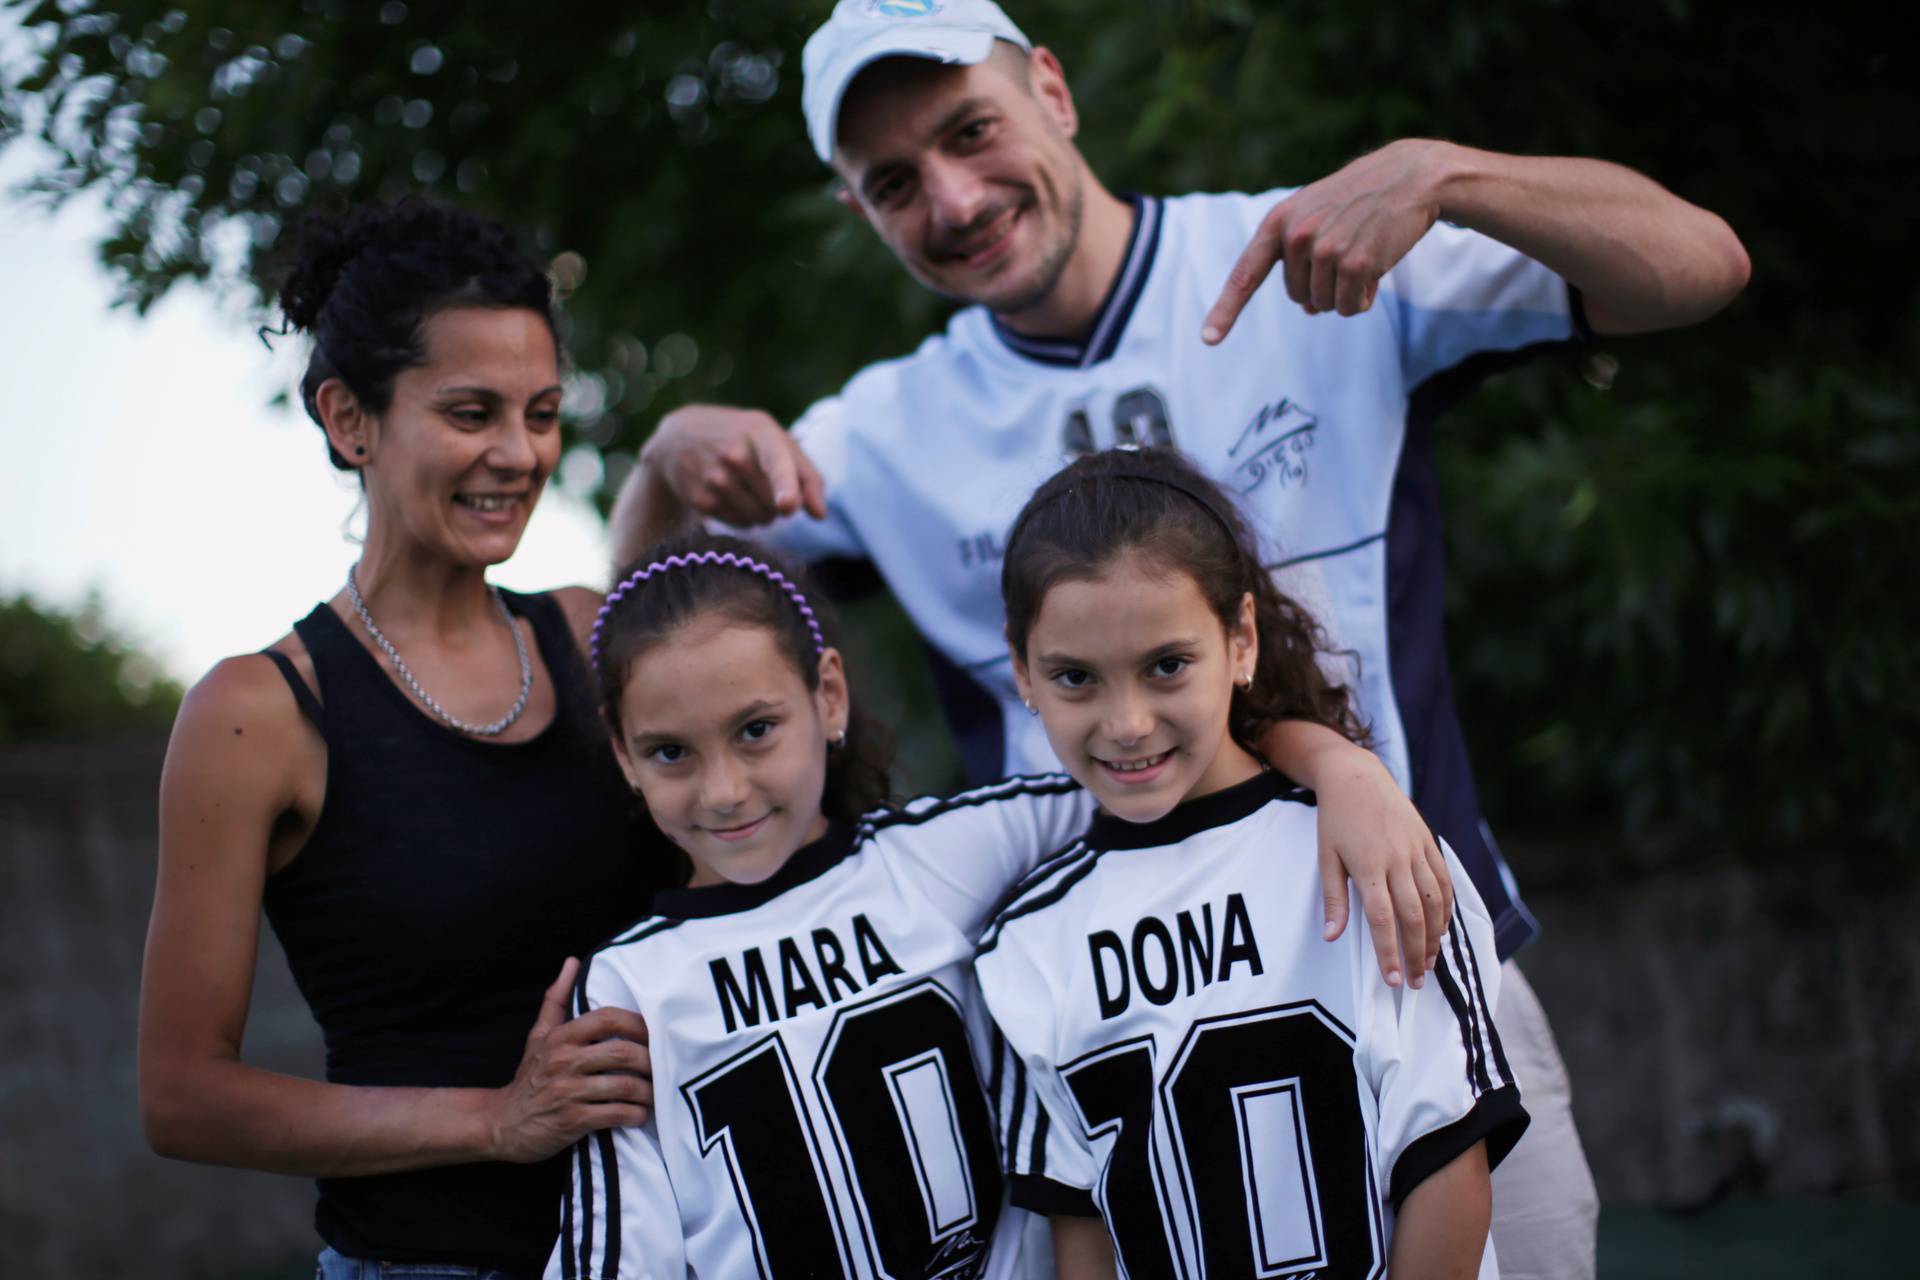 Walter Gaston Rotundo, a devoted Diego Maradona fan who named his twin daughters Mara and Dona after the soccer star, poses with his family in Buenos Aires